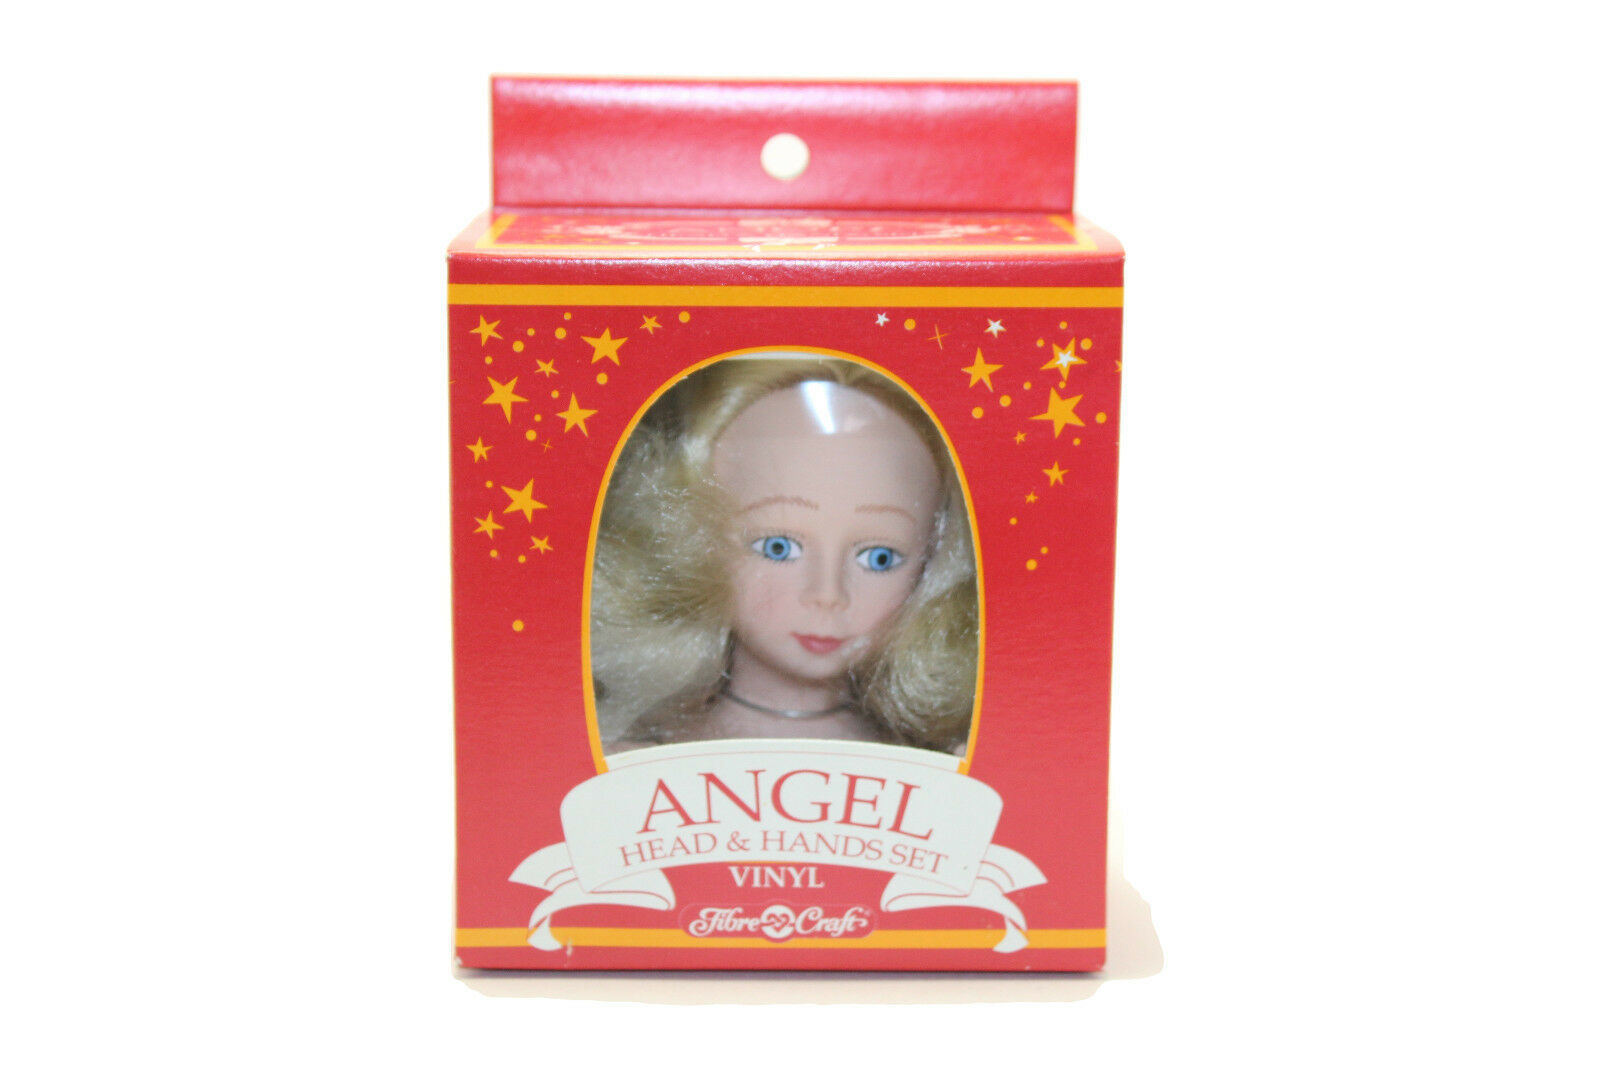 Primary image for 1991 Fibre Craft Vinyl Angel Head & Hands Set for Soft Body Doll Tree Top  - NOS